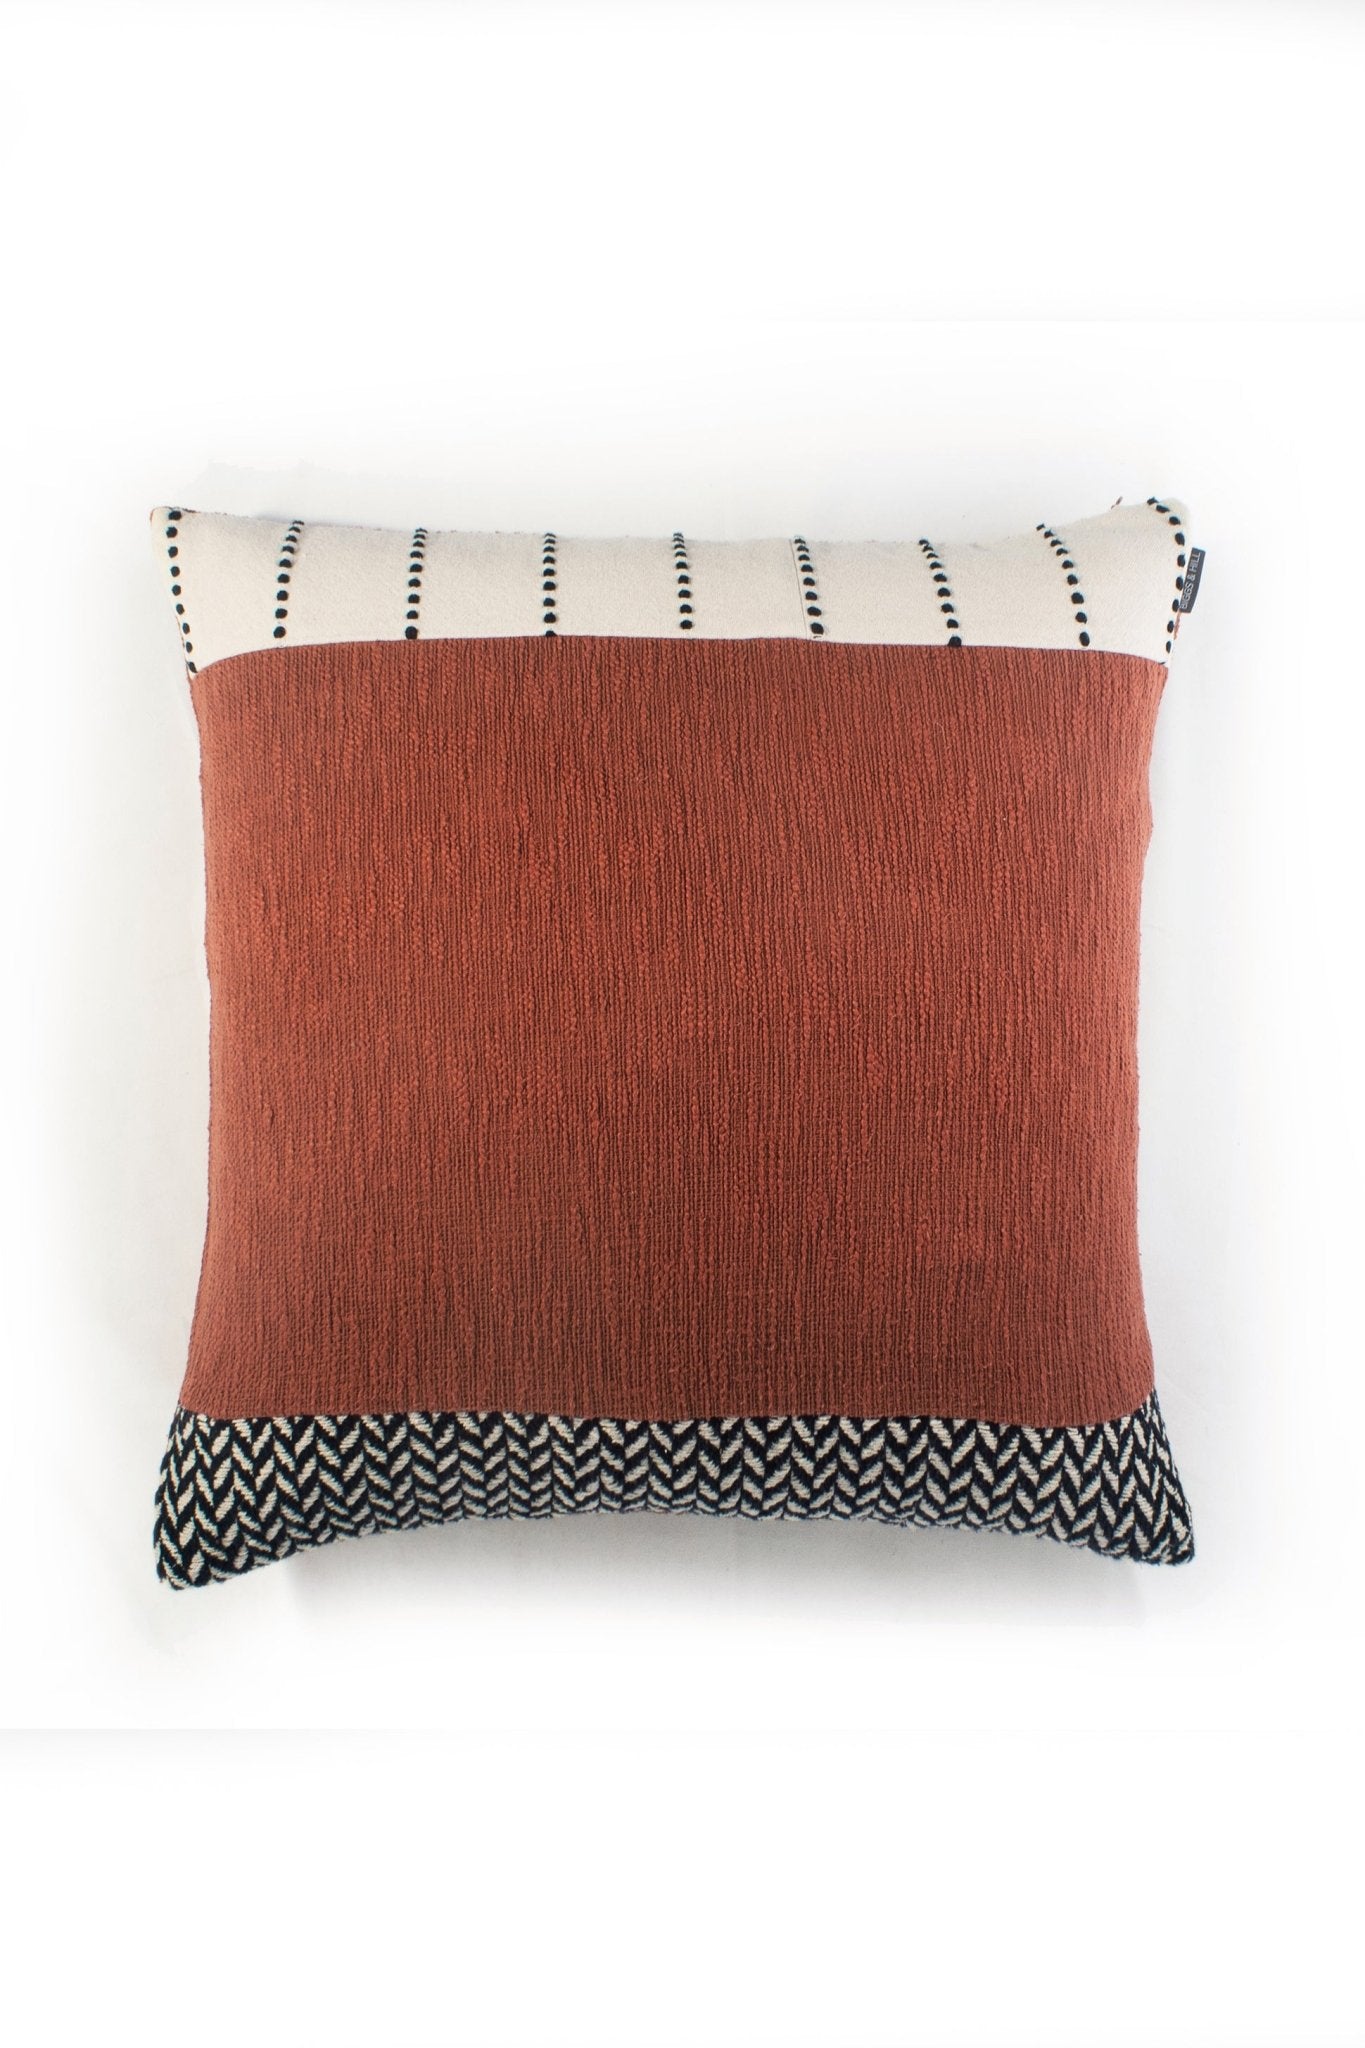 Red, Black and White Boho Cotton Cushion Cover - Biggs & Hill - Cushion Covers - 18 inch - 24 inch - 31 inches